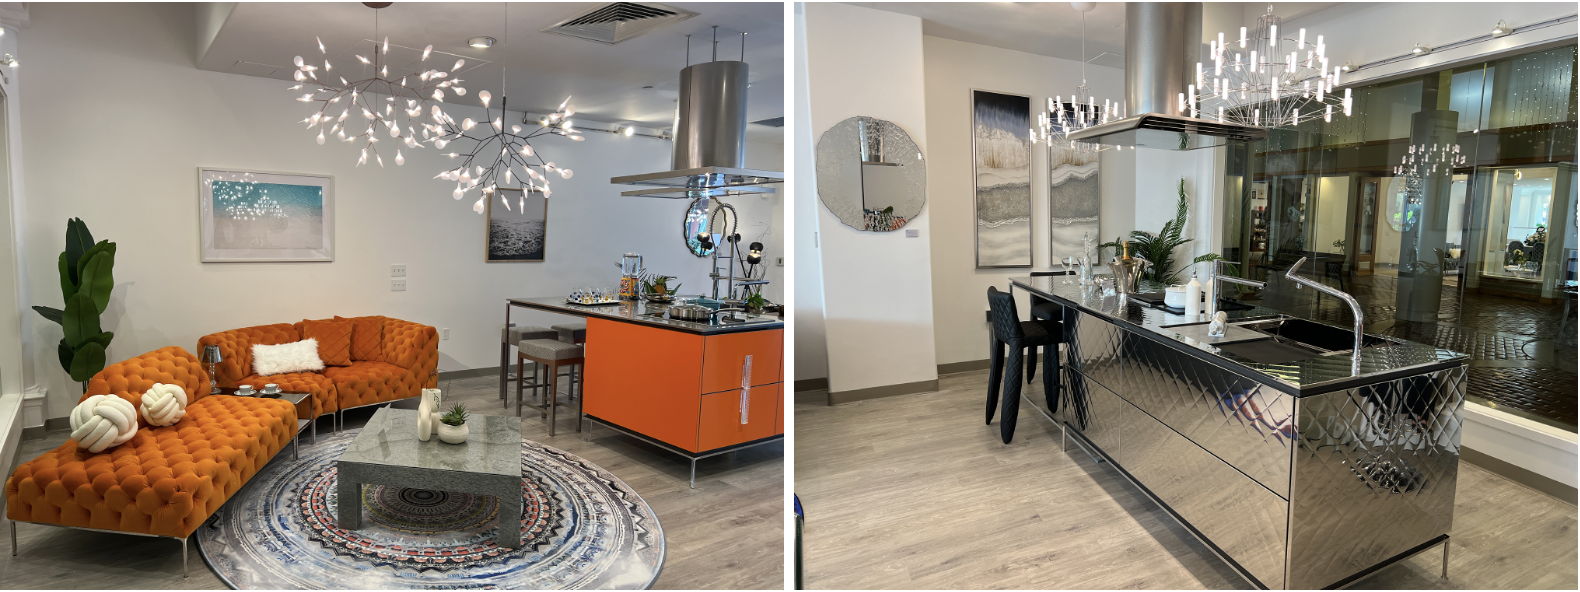 Toyo Kitchen Style's new showroom will feature high-end, modern kitchen décor and accessories such as lighting, home goods, furniture and workshops.